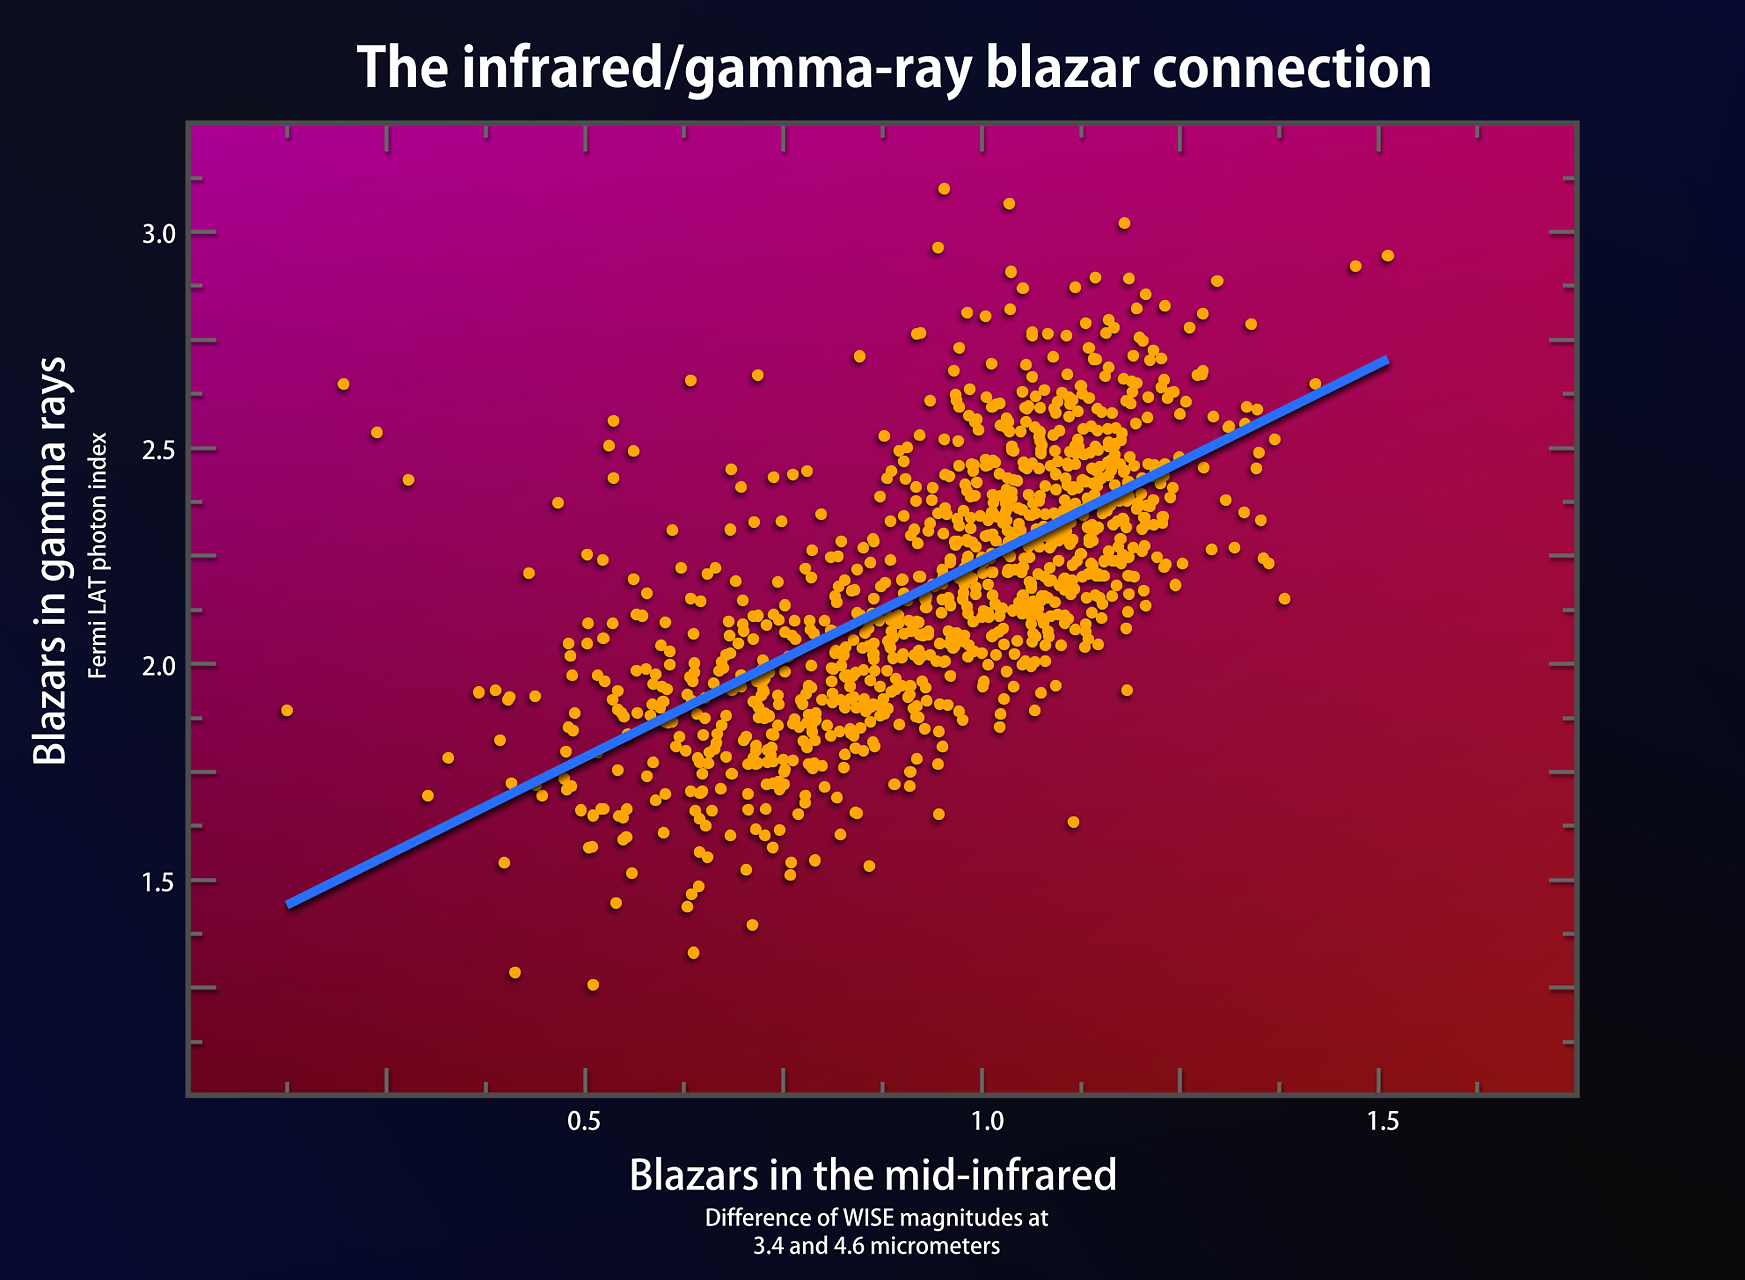 Plot of correllation in emissions of blazars from mid-infrared to gamma rays